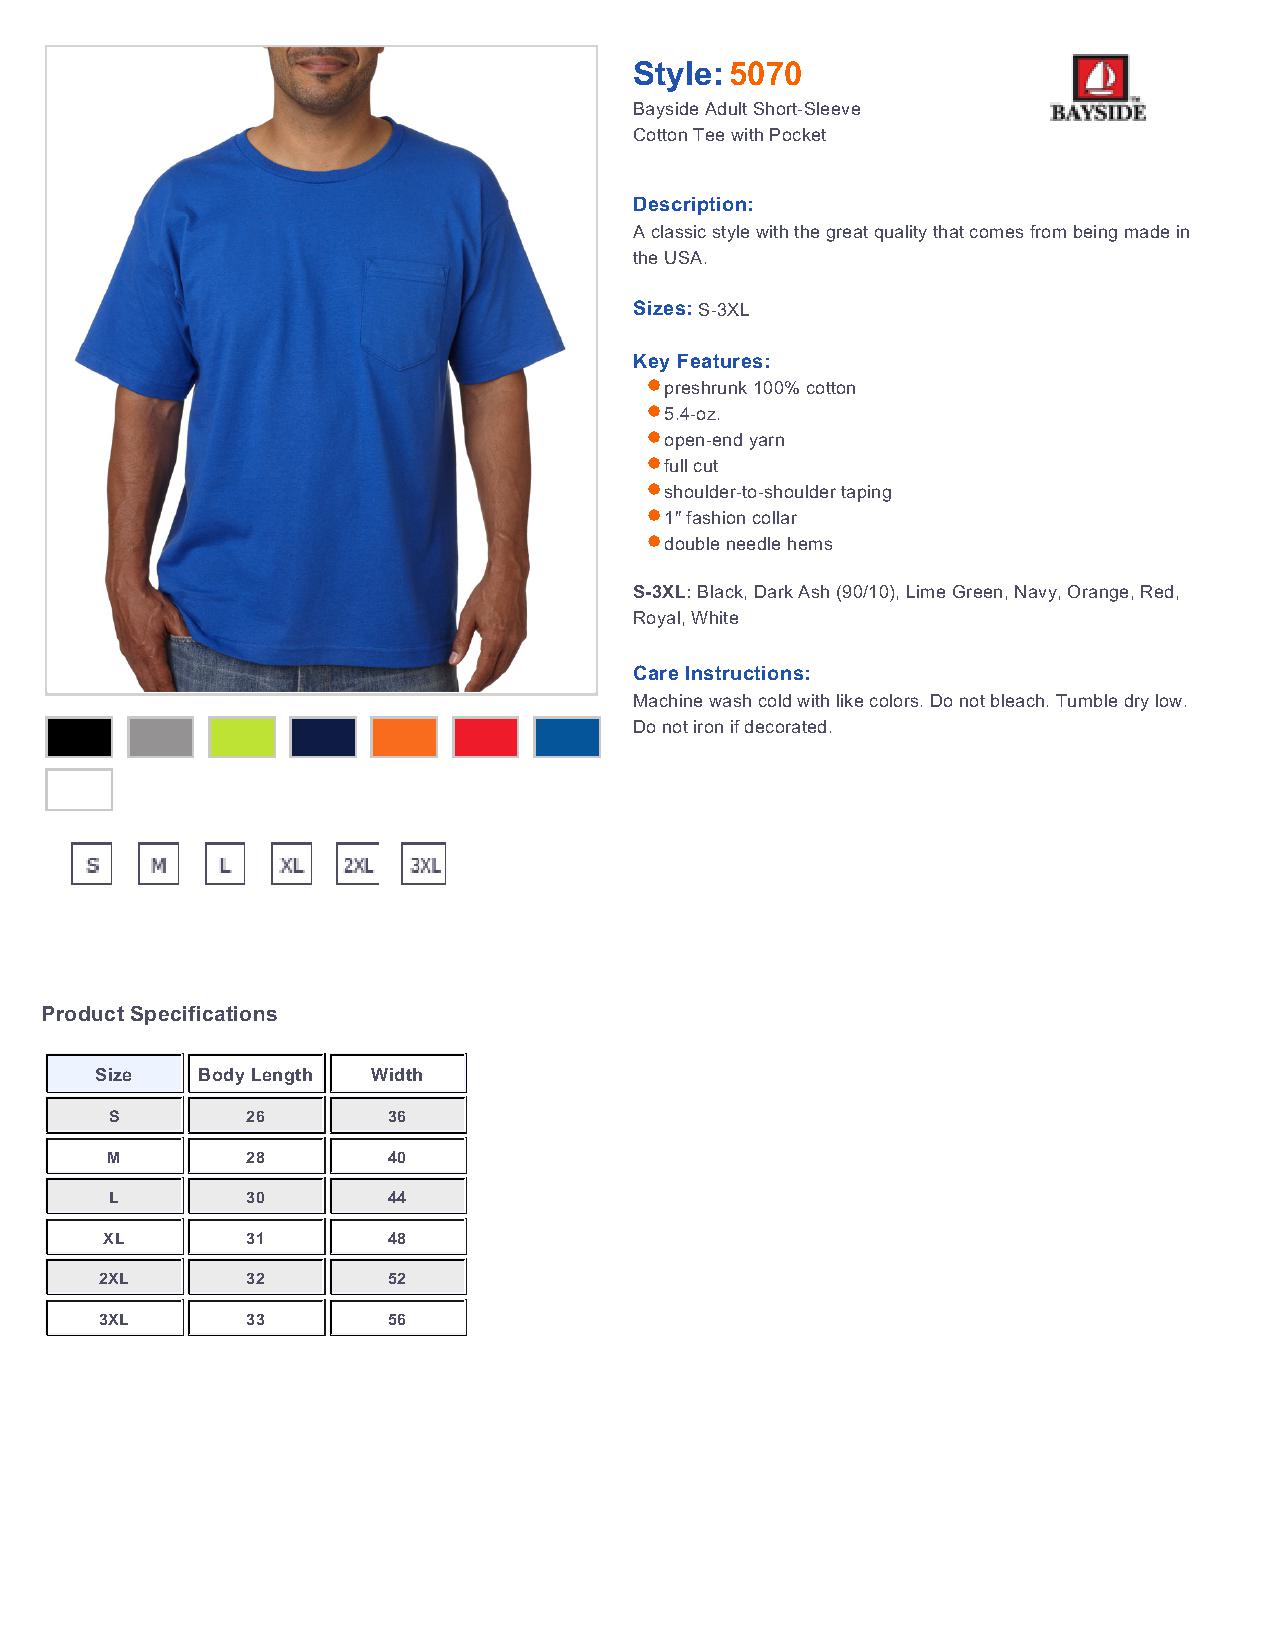 Bayside 5070 - Adult Short-Sleeve Cotton Tee with Pocket $6.73 - T-Shirts